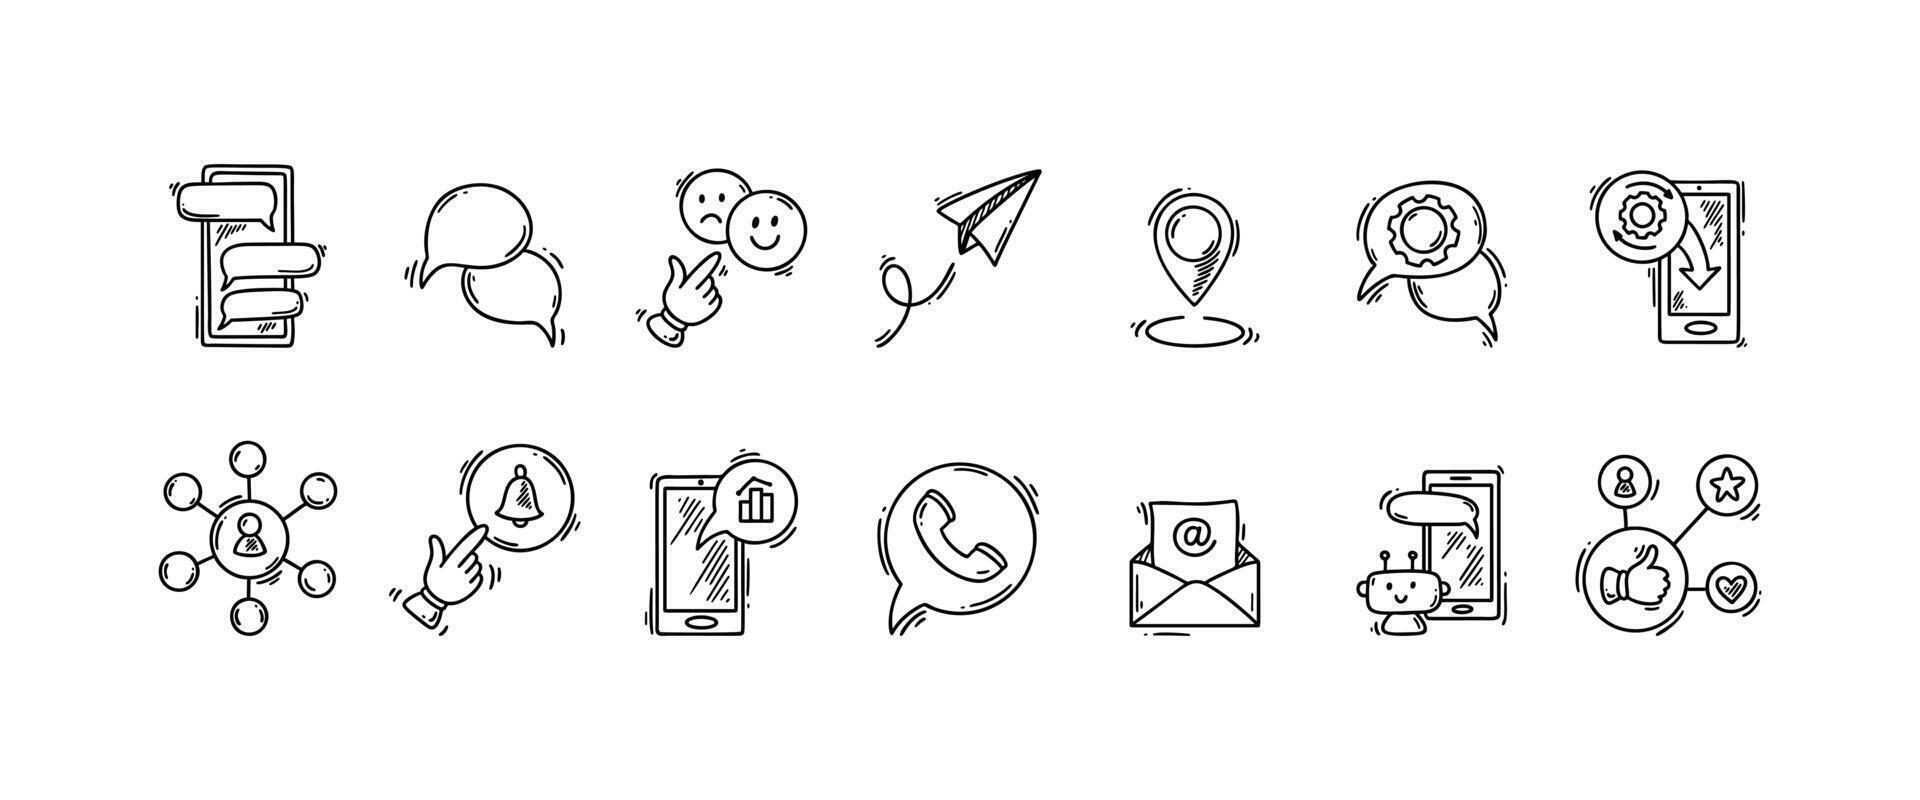 Smartphone using doodle icon set. Hand drawn sketch online robot chatbot, Social media direct messaging and followers, subscribe and enable notifications, download and install application. vector